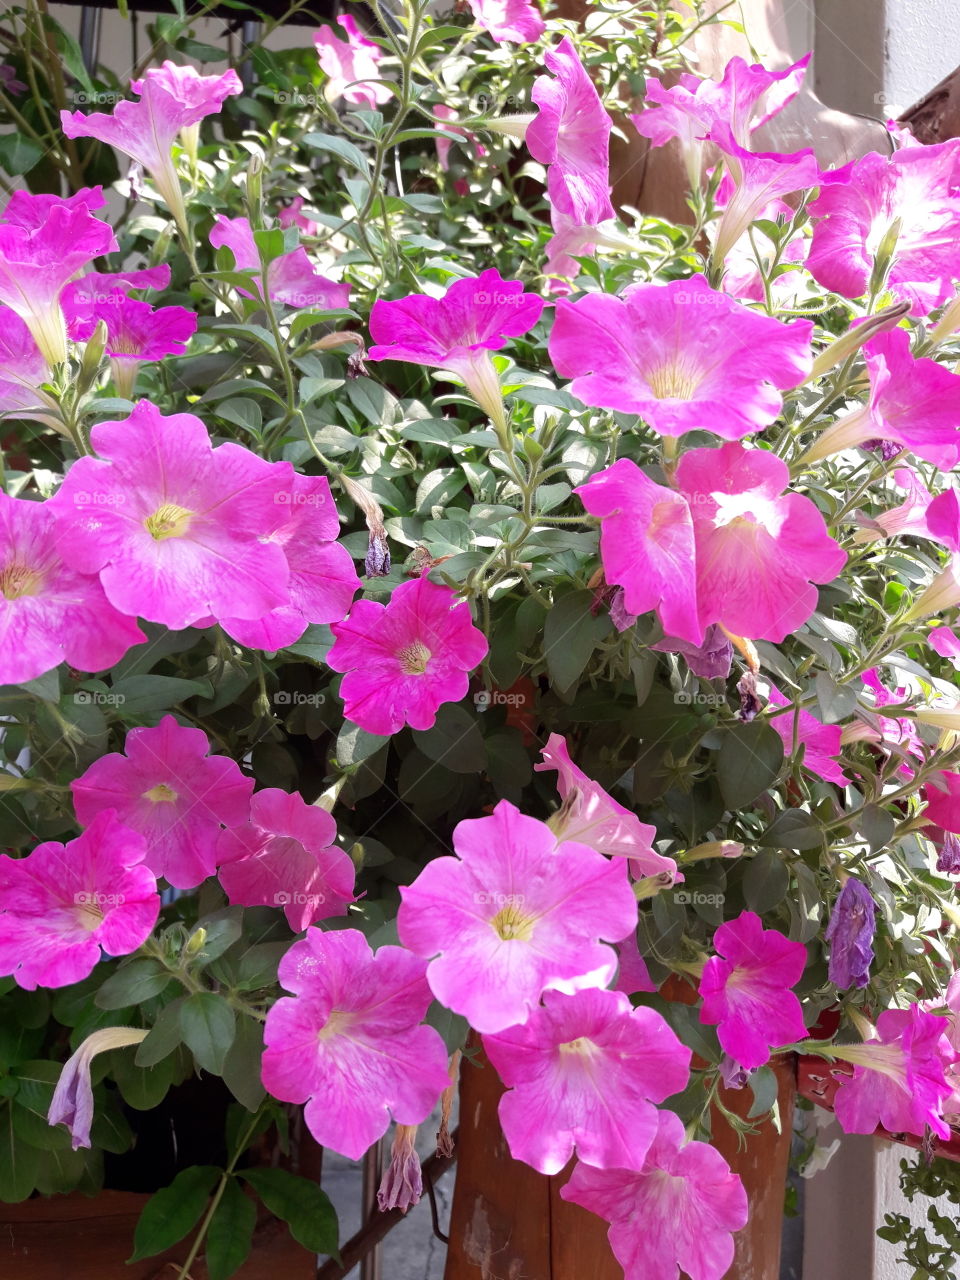 the bush of blooming purple flowers among the sunshine.